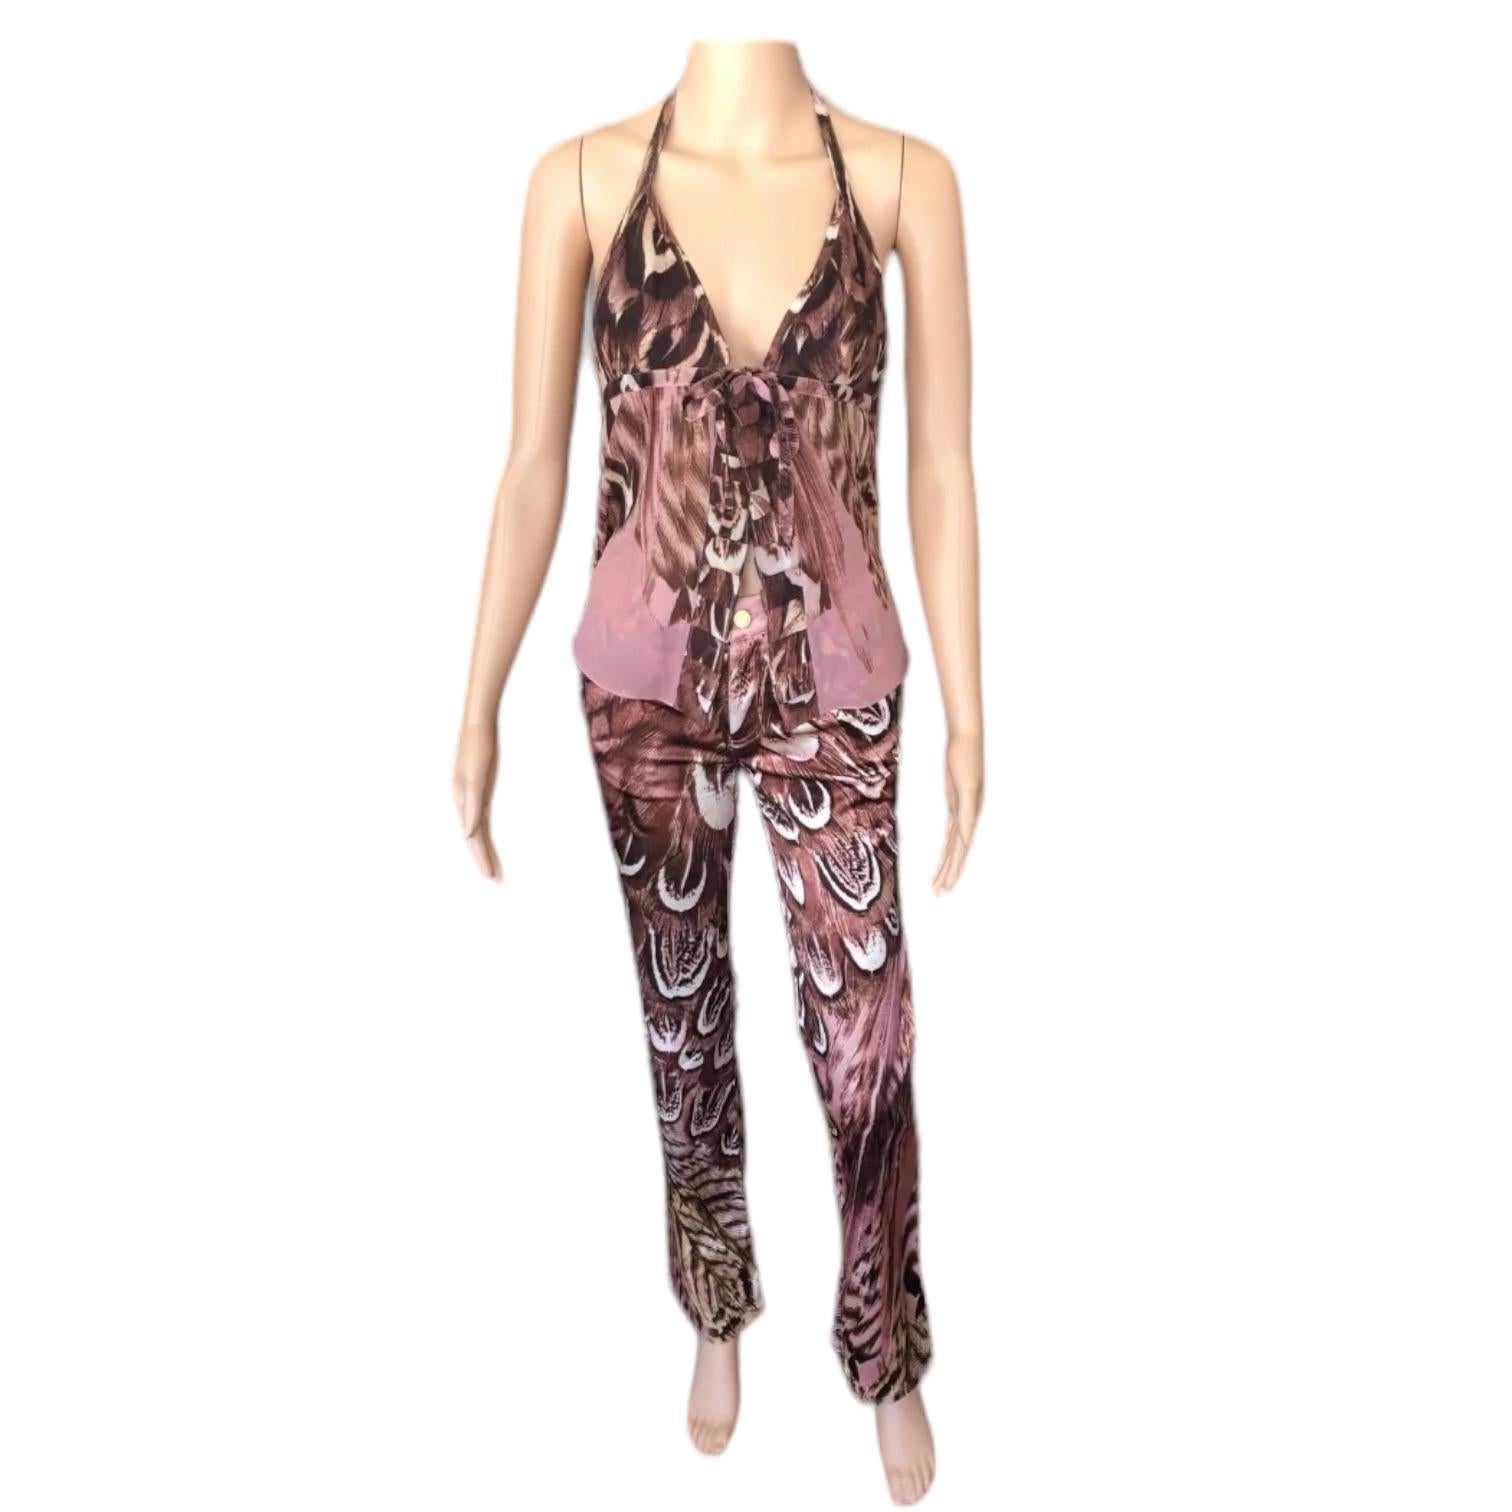 Roberto Cavalli S/S 2005 Feather Print Halter Top & Pants 2 Piece Set Ensemble In Excellent Condition For Sale In Naples, FL